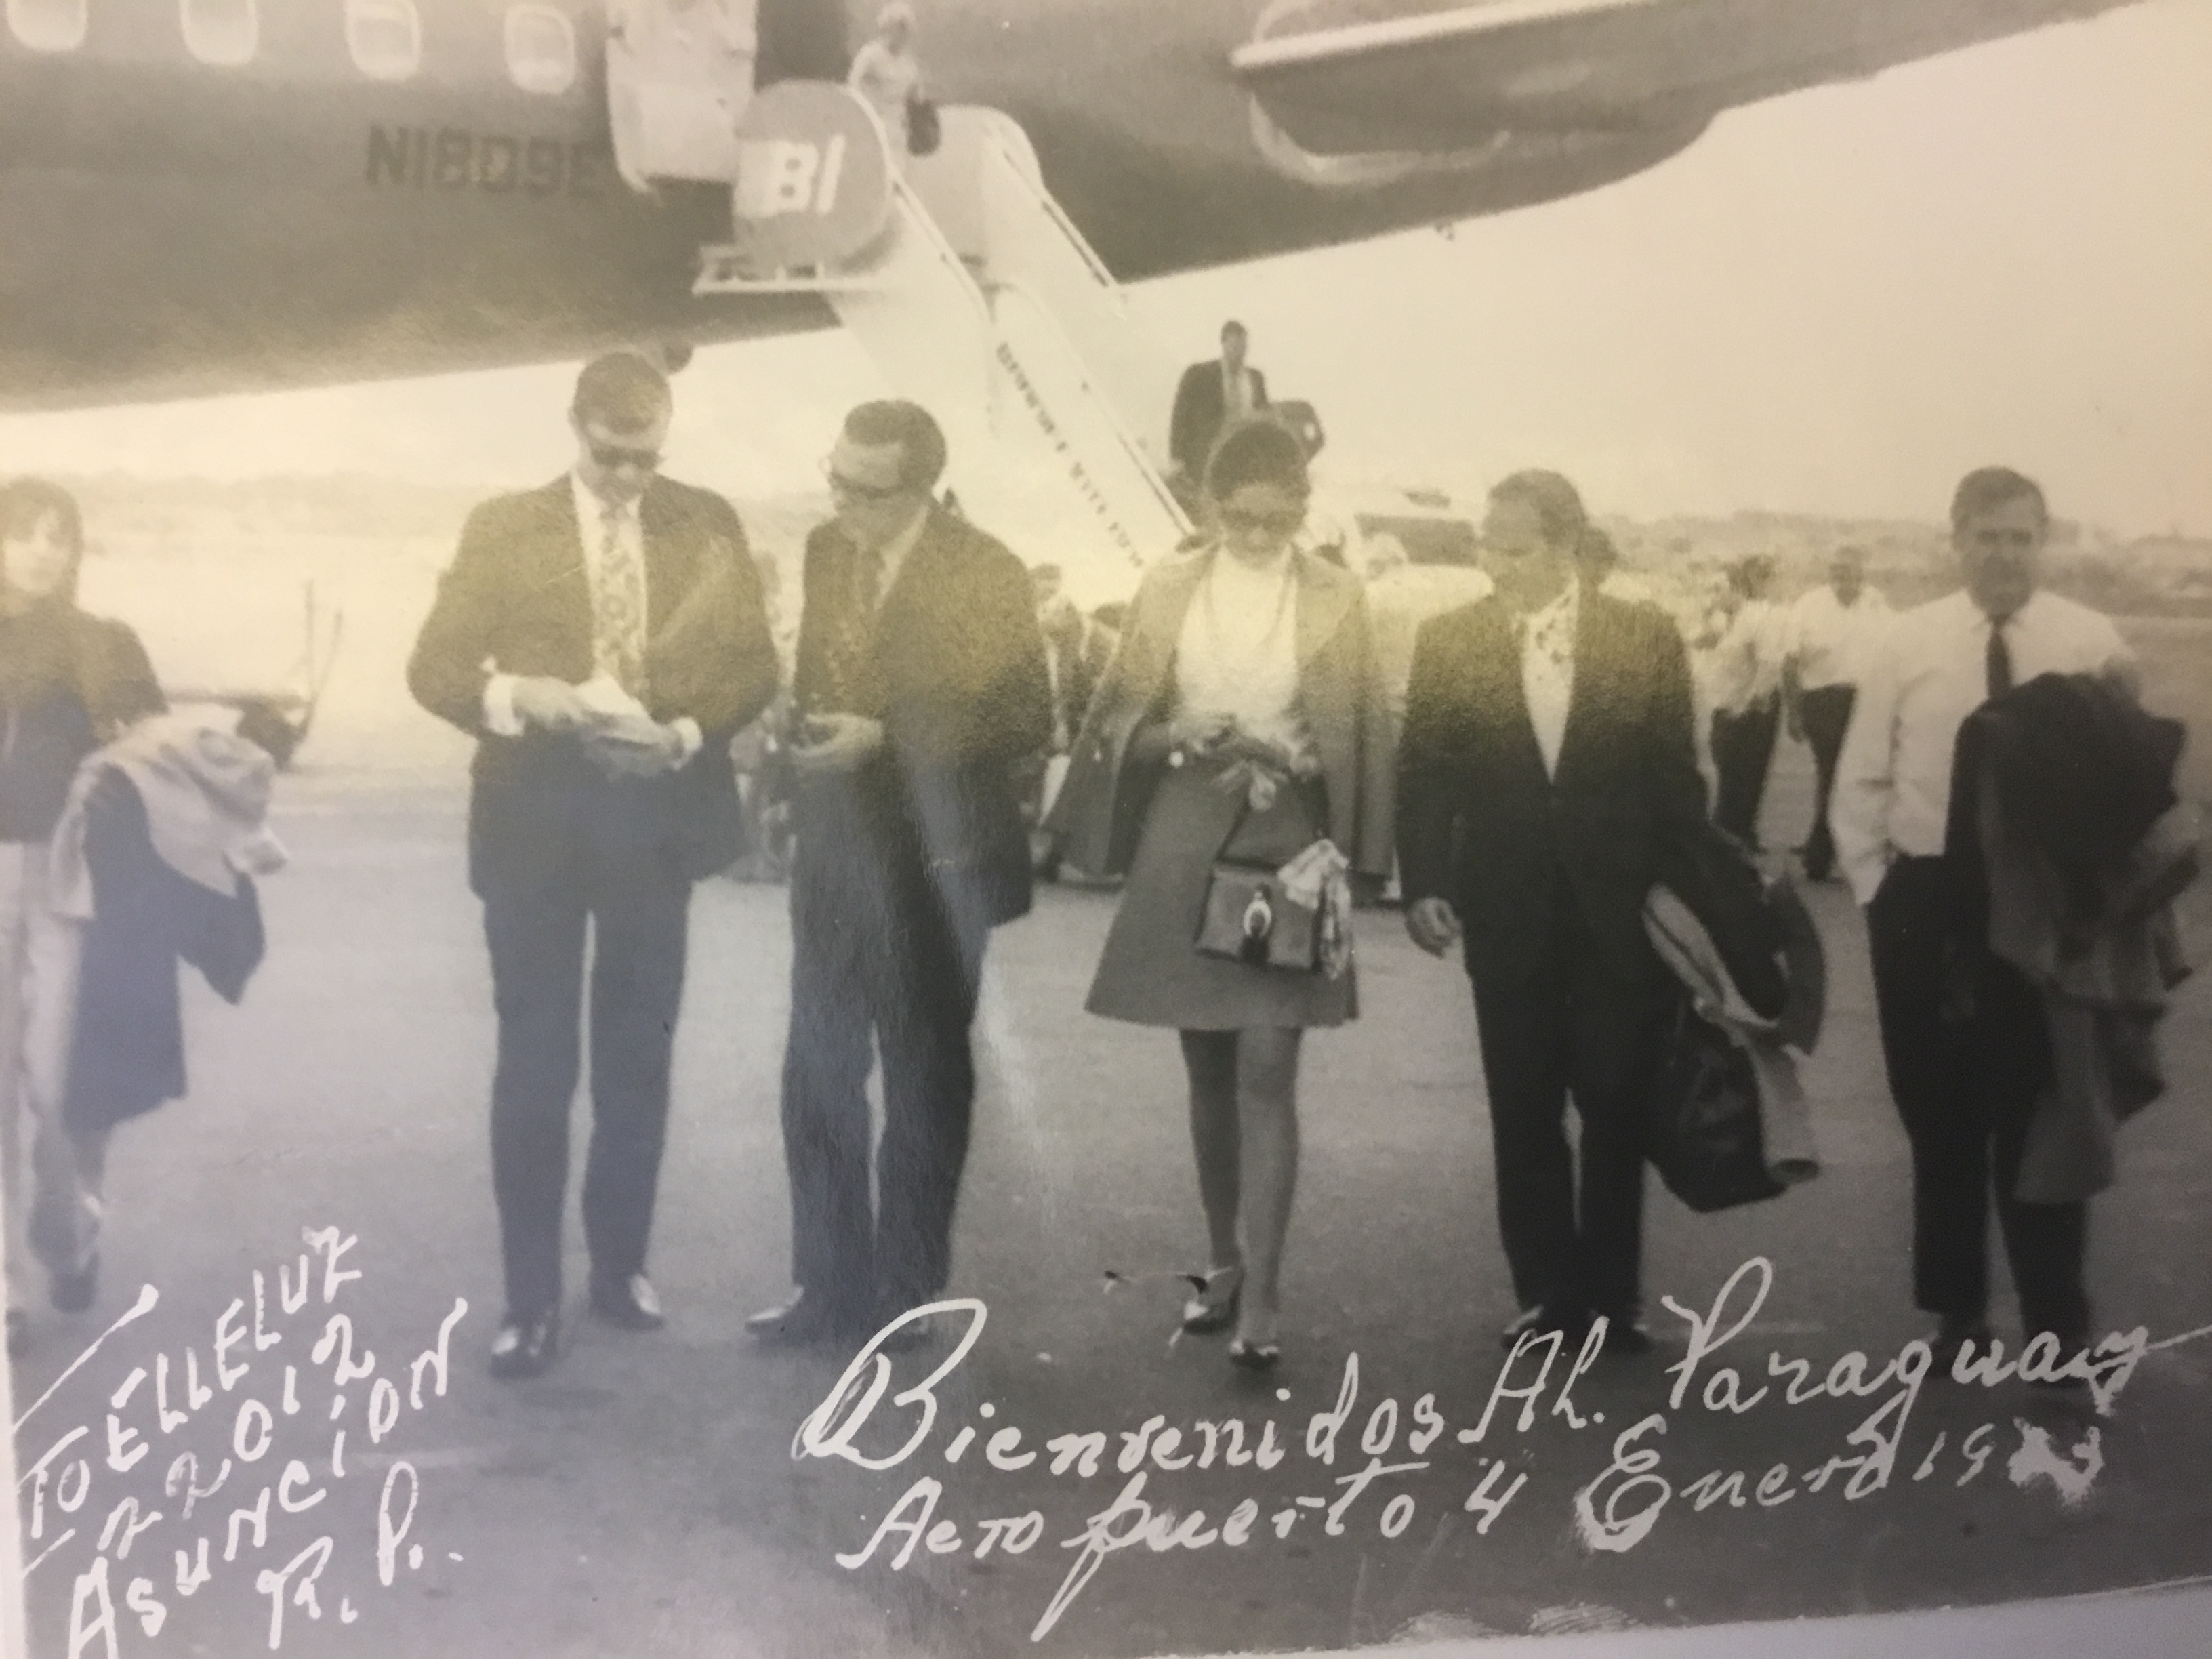 As the Smiths arrive in Asunción, Paraguay, in January 1973, they are met by Embassy personnel. 